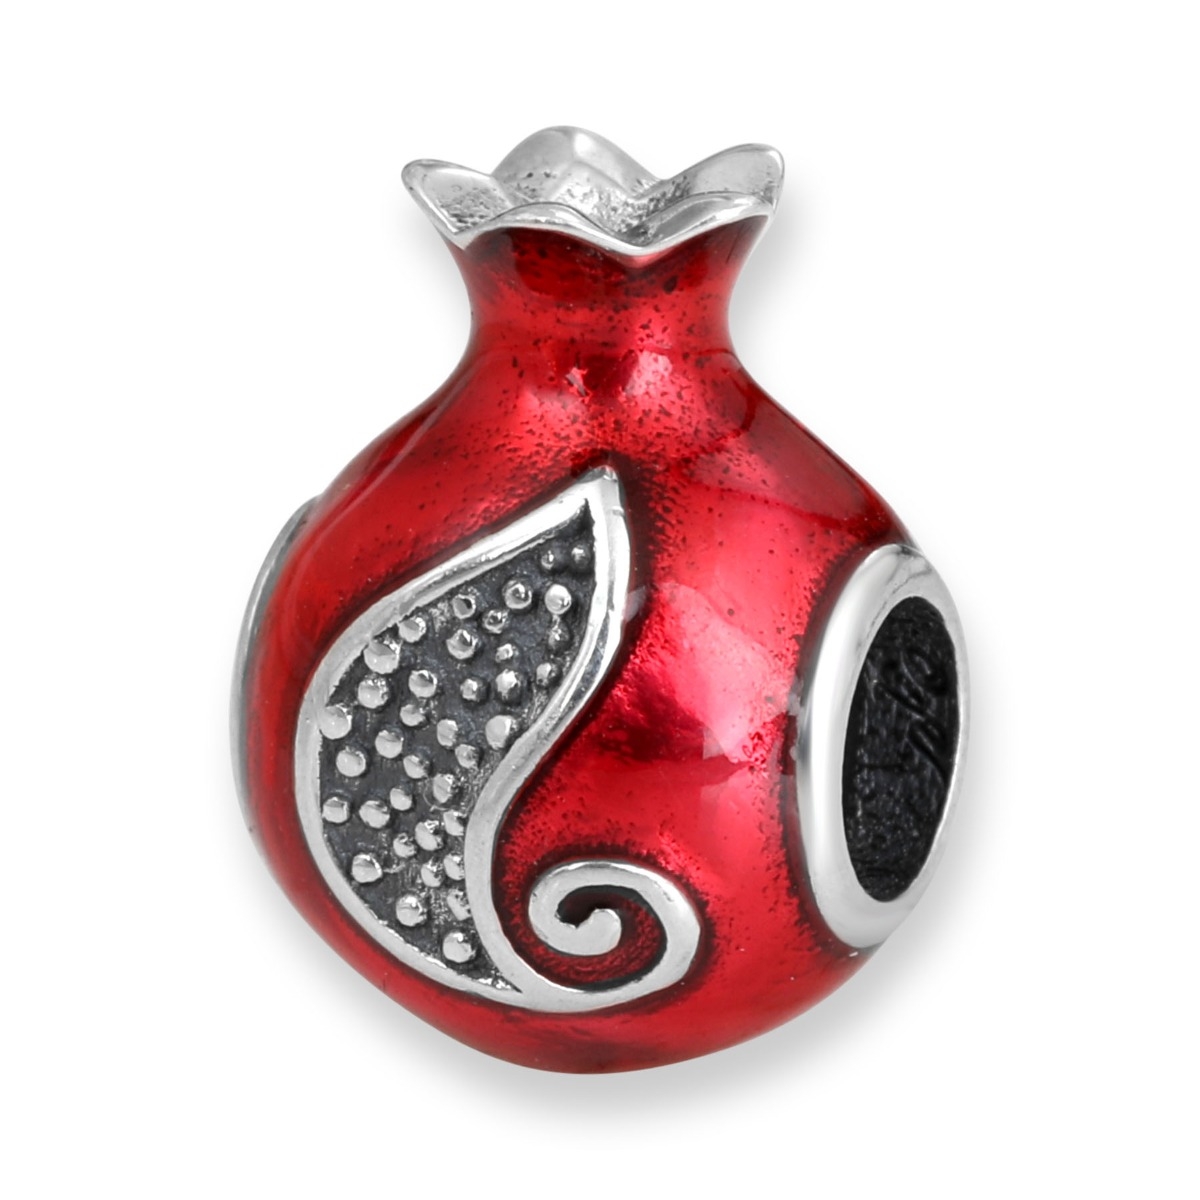 Sterling Silver Pomegranate Bead Charm - 1